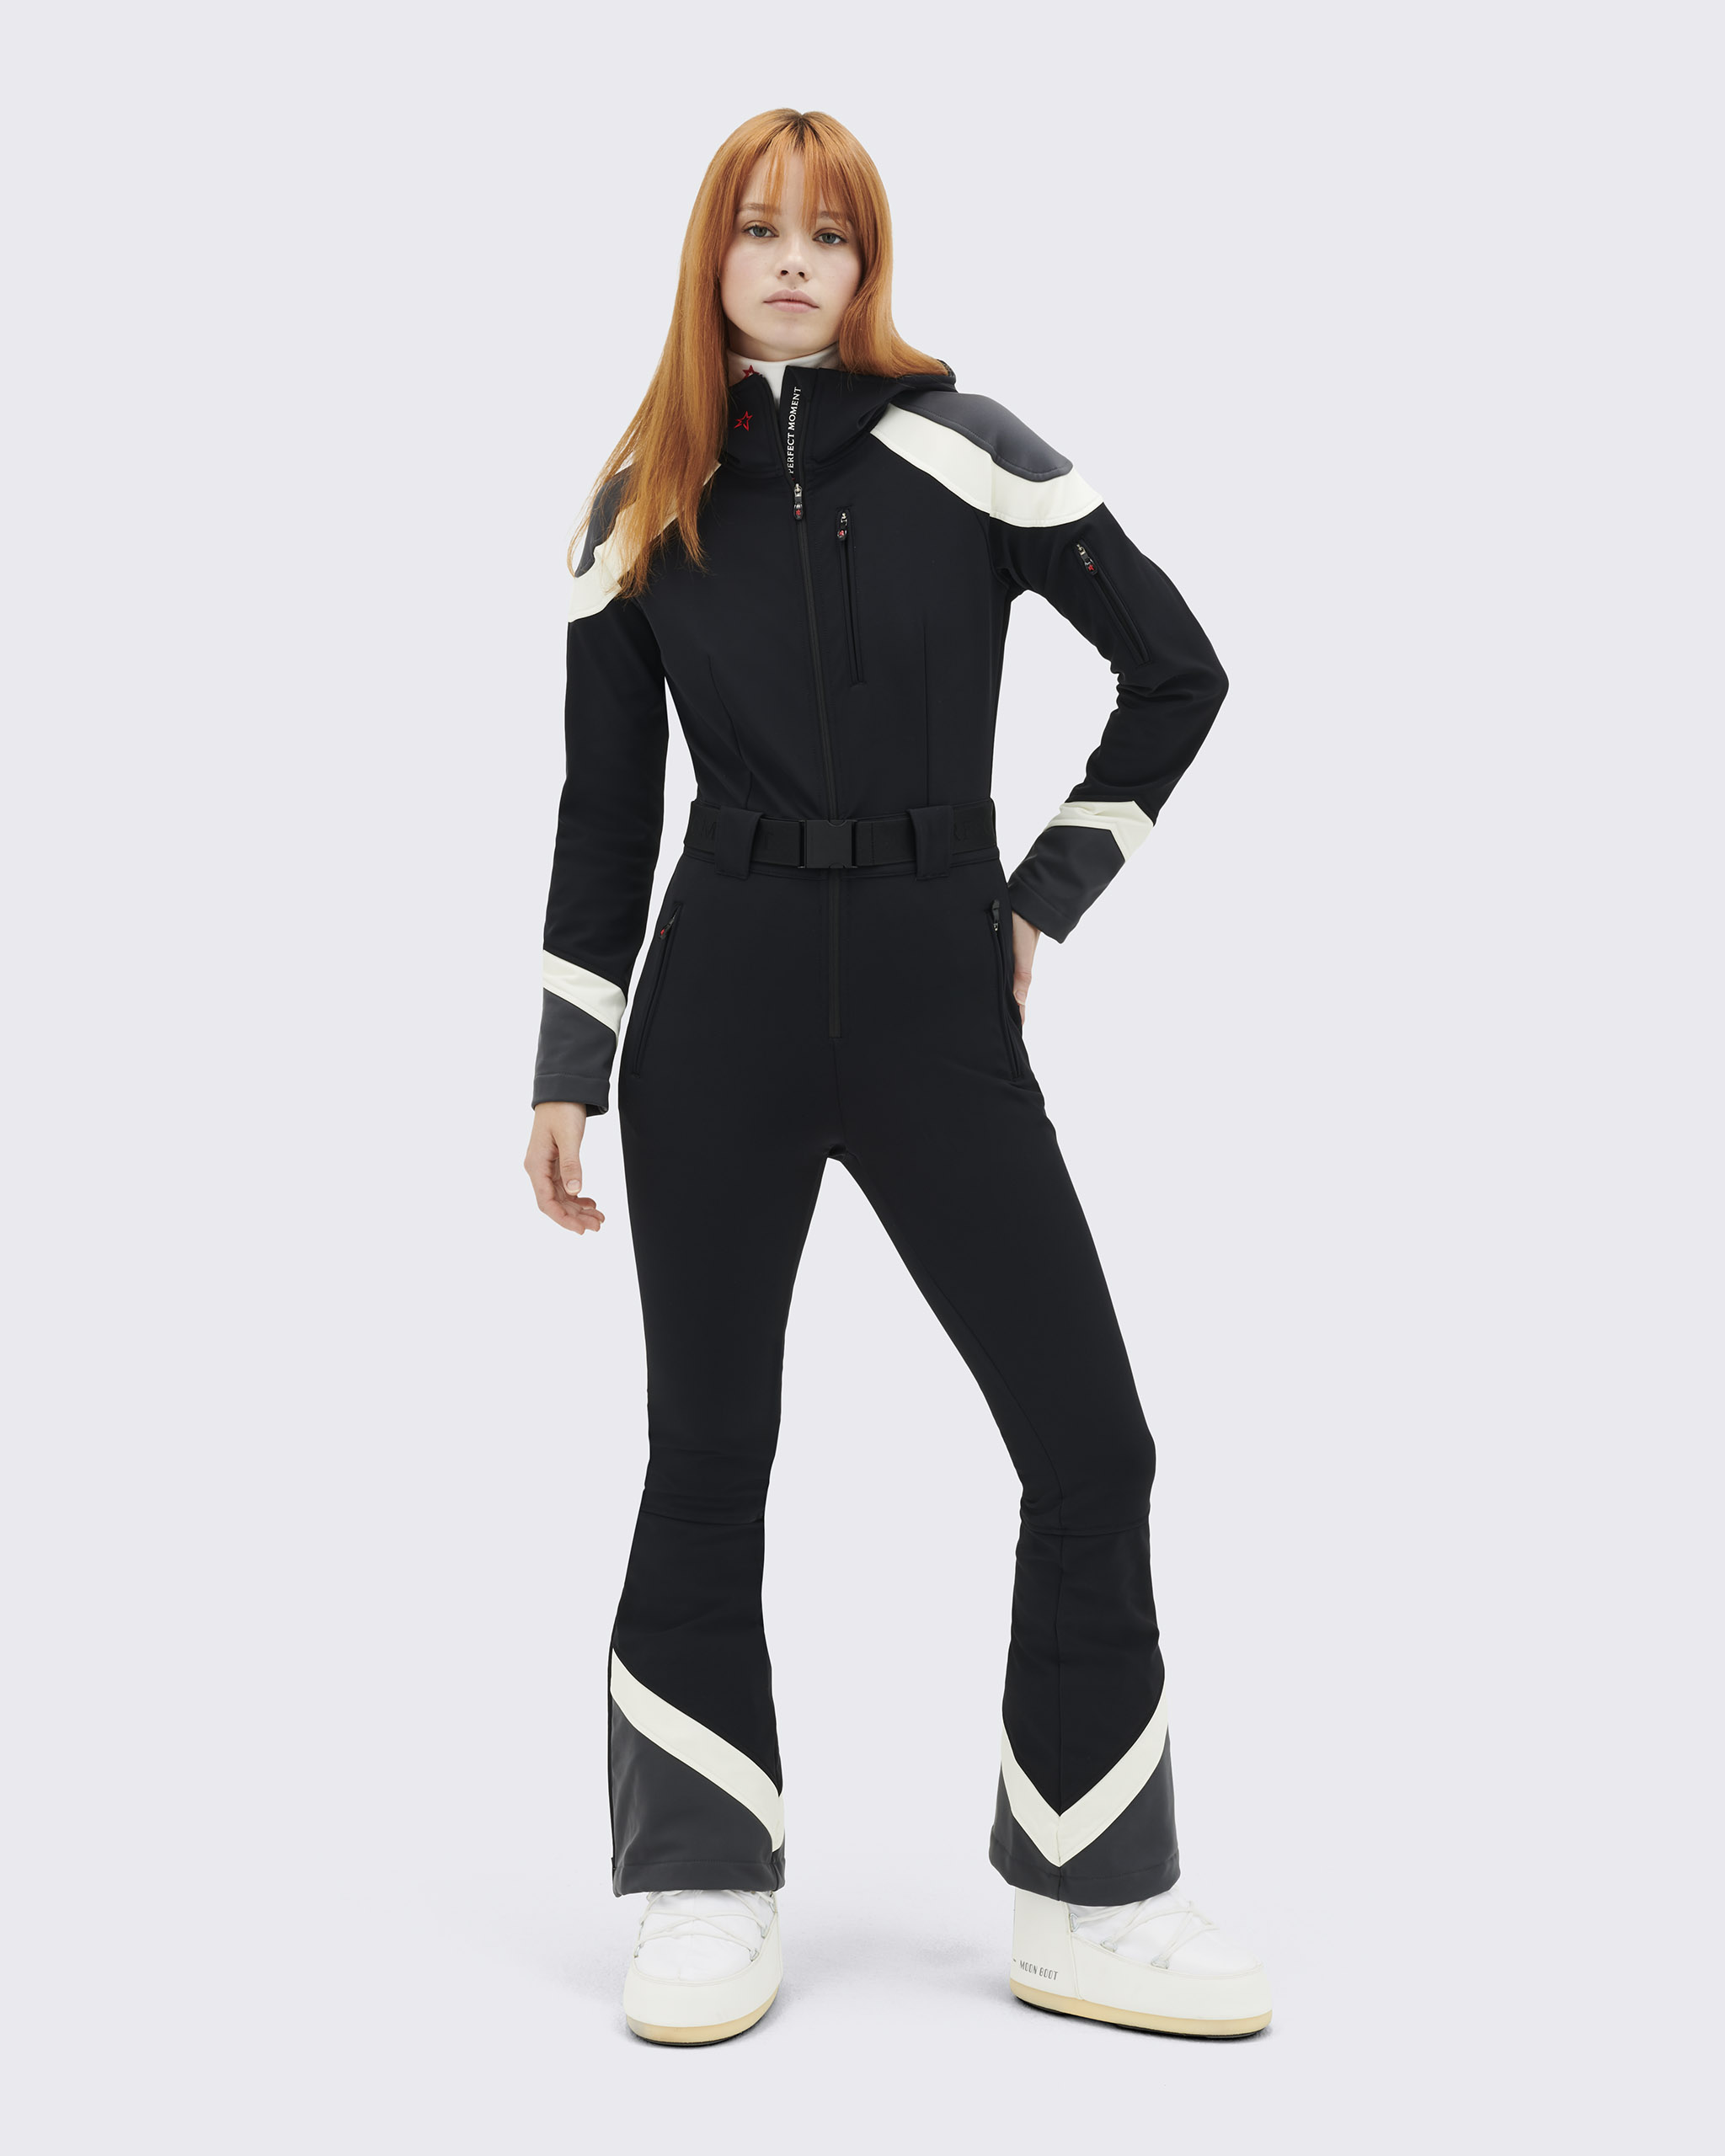 Buy Thermals for Women: Thermal Vests, Thermal Tops, Thermal